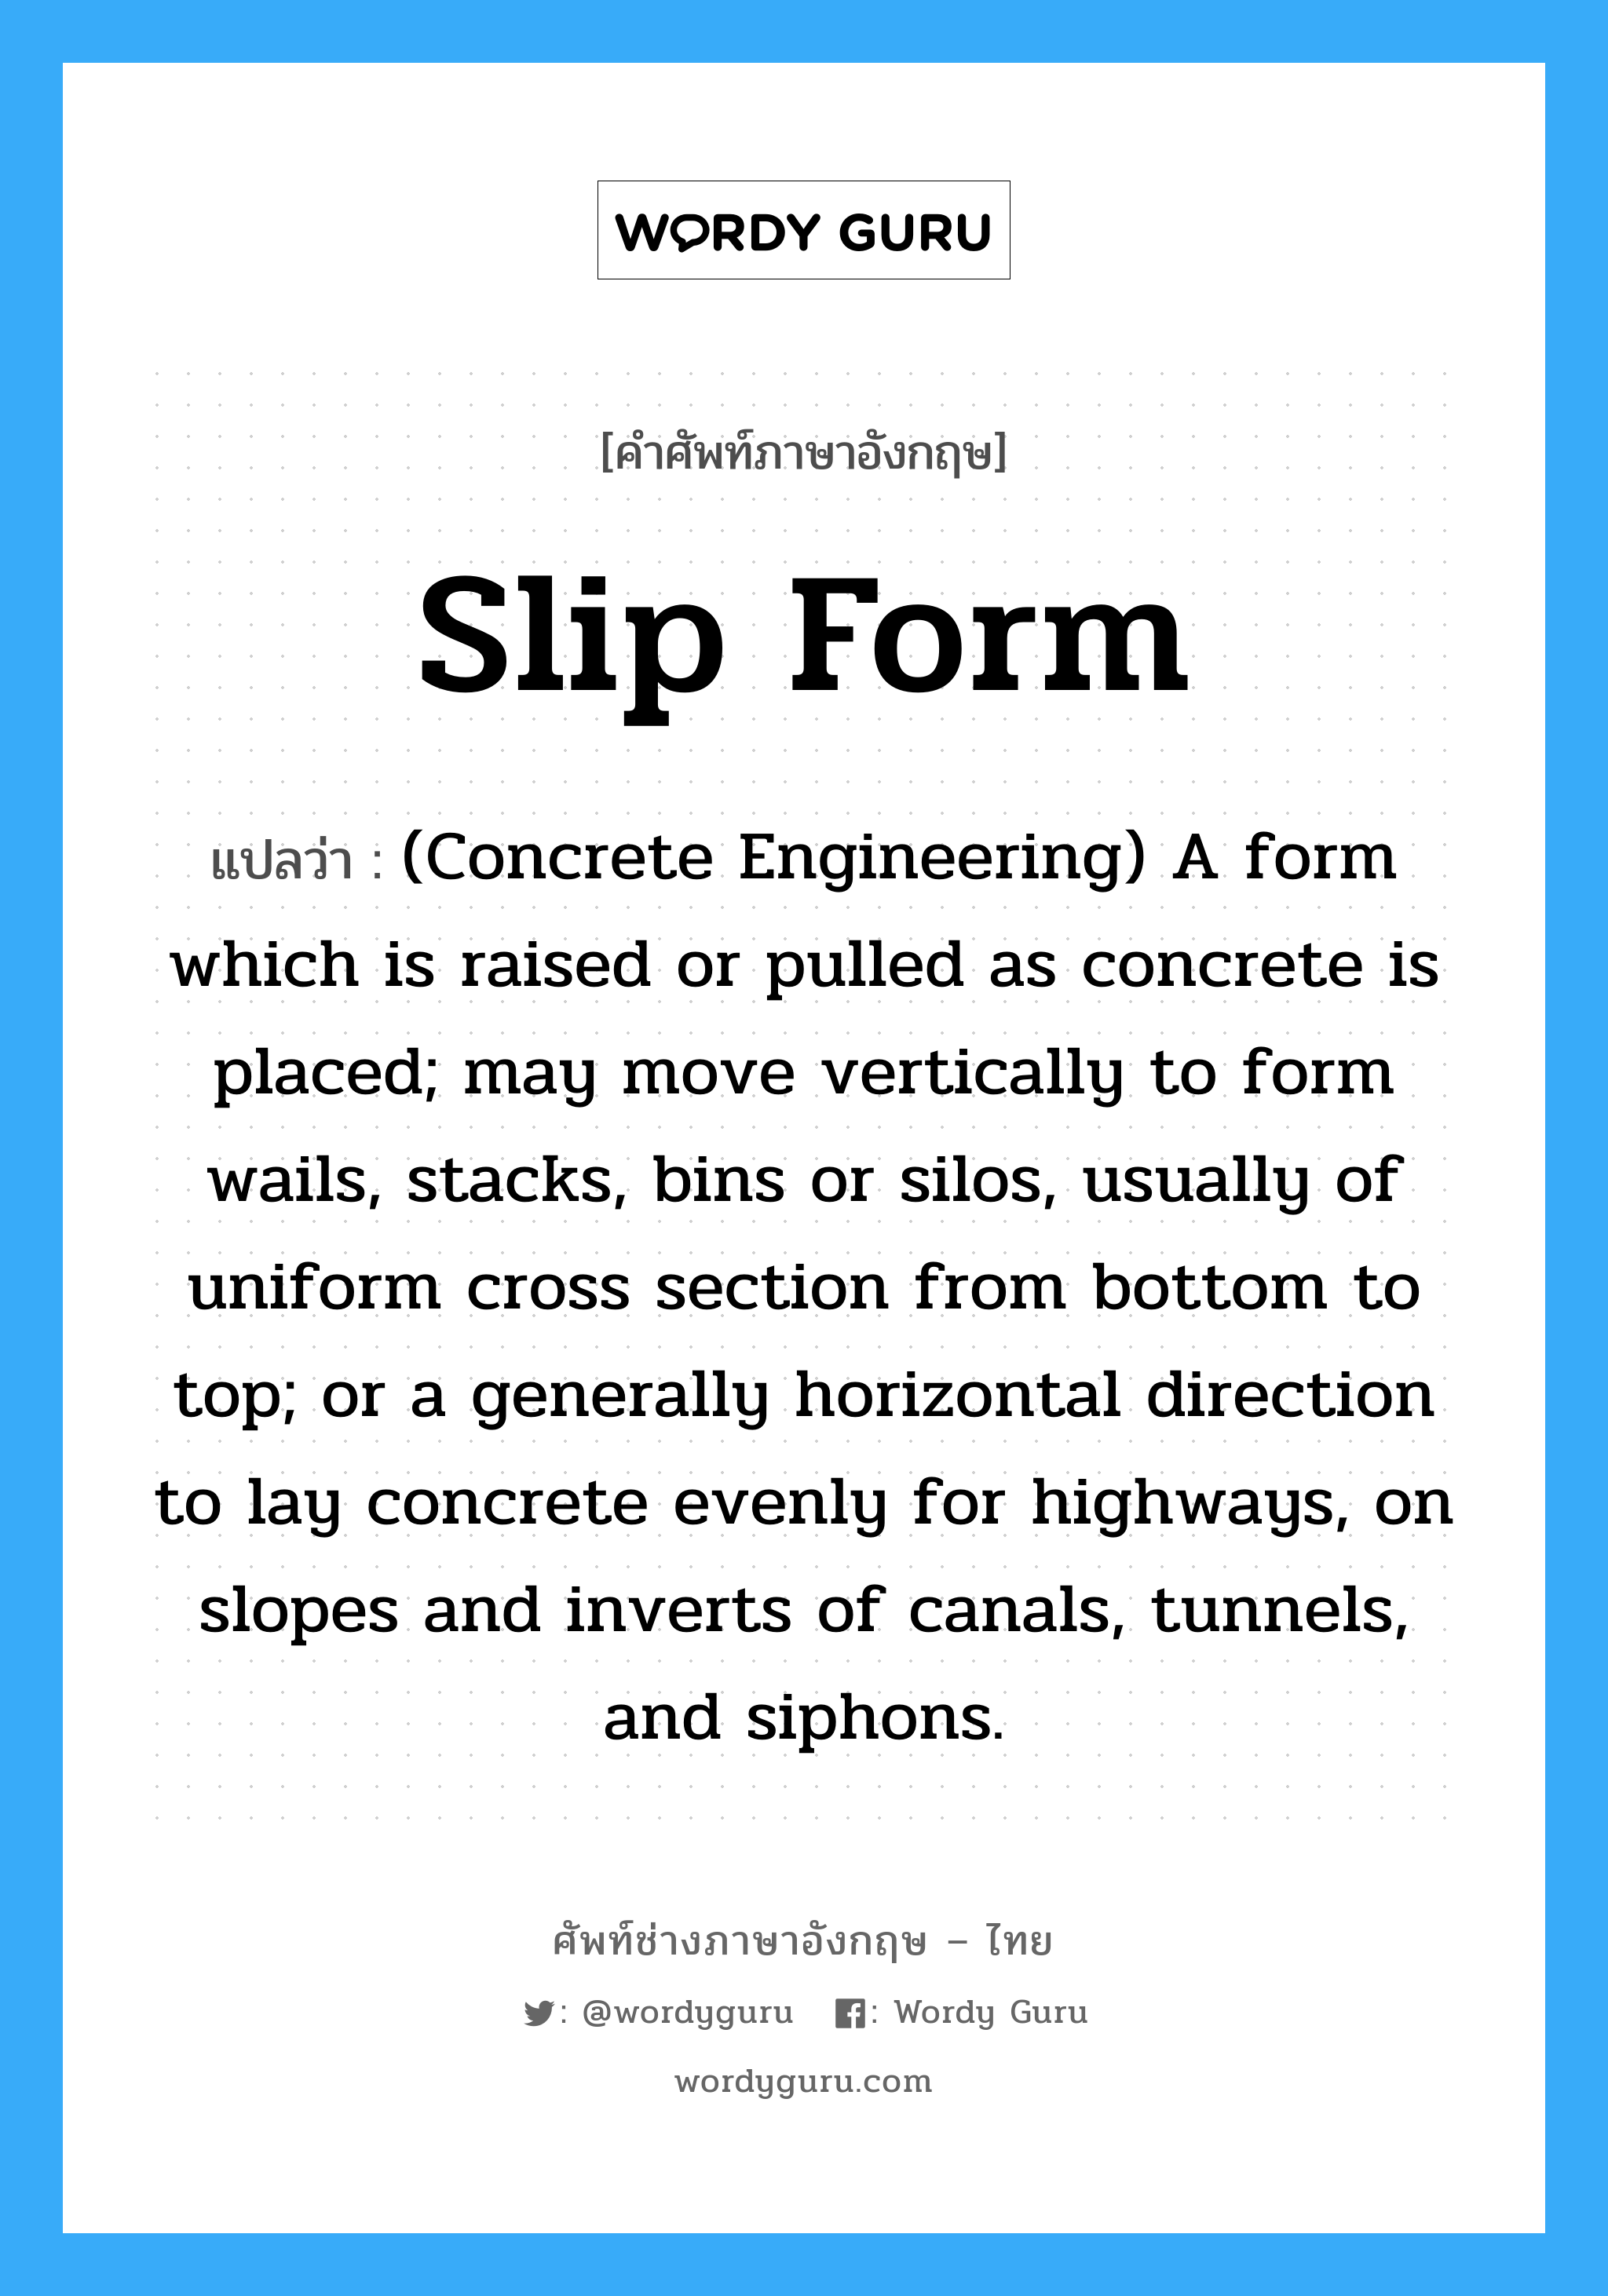 Slip Form แปลว่า?, คำศัพท์ช่างภาษาอังกฤษ - ไทย Slip Form คำศัพท์ภาษาอังกฤษ Slip Form แปลว่า (Concrete Engineering) A form which is raised or pulled as concrete is placed; may move vertically to form wails, stacks, bins or silos, usually of uniform cross section from bottom to top; or a generally horizontal direction to lay concrete evenly for highways, on slopes and inverts of canals, tunnels, and siphons.